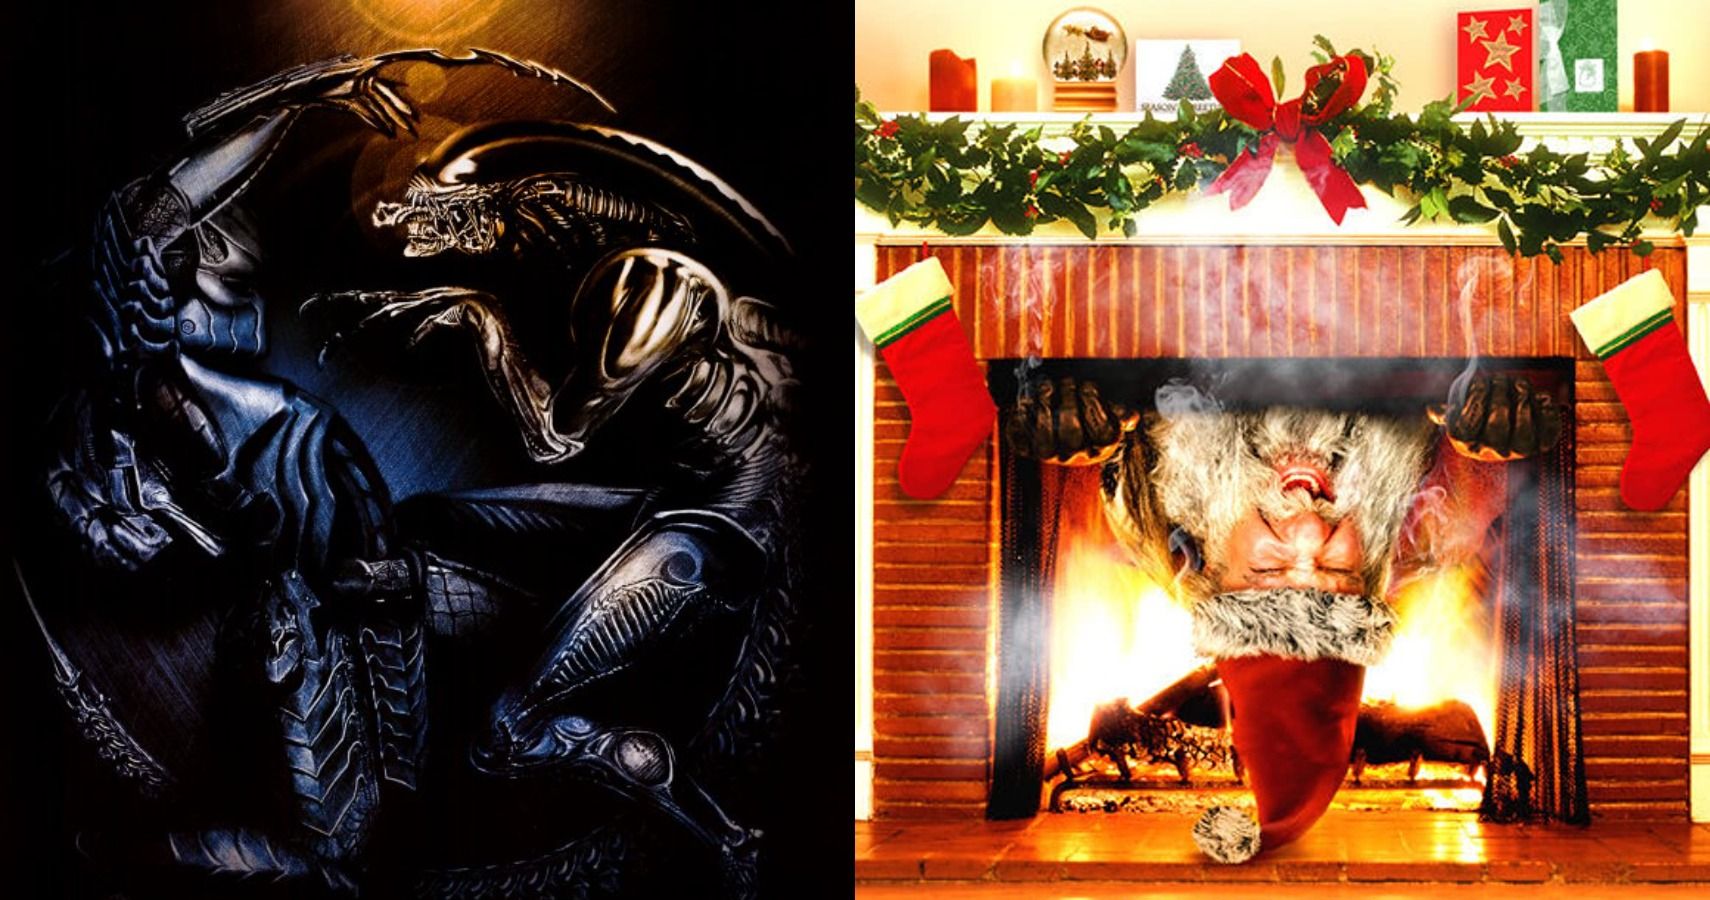 A mock hieroglyph of the Xenomorph and Predator battling each other and an angry Santa Claus hangs upside down in a chimney.